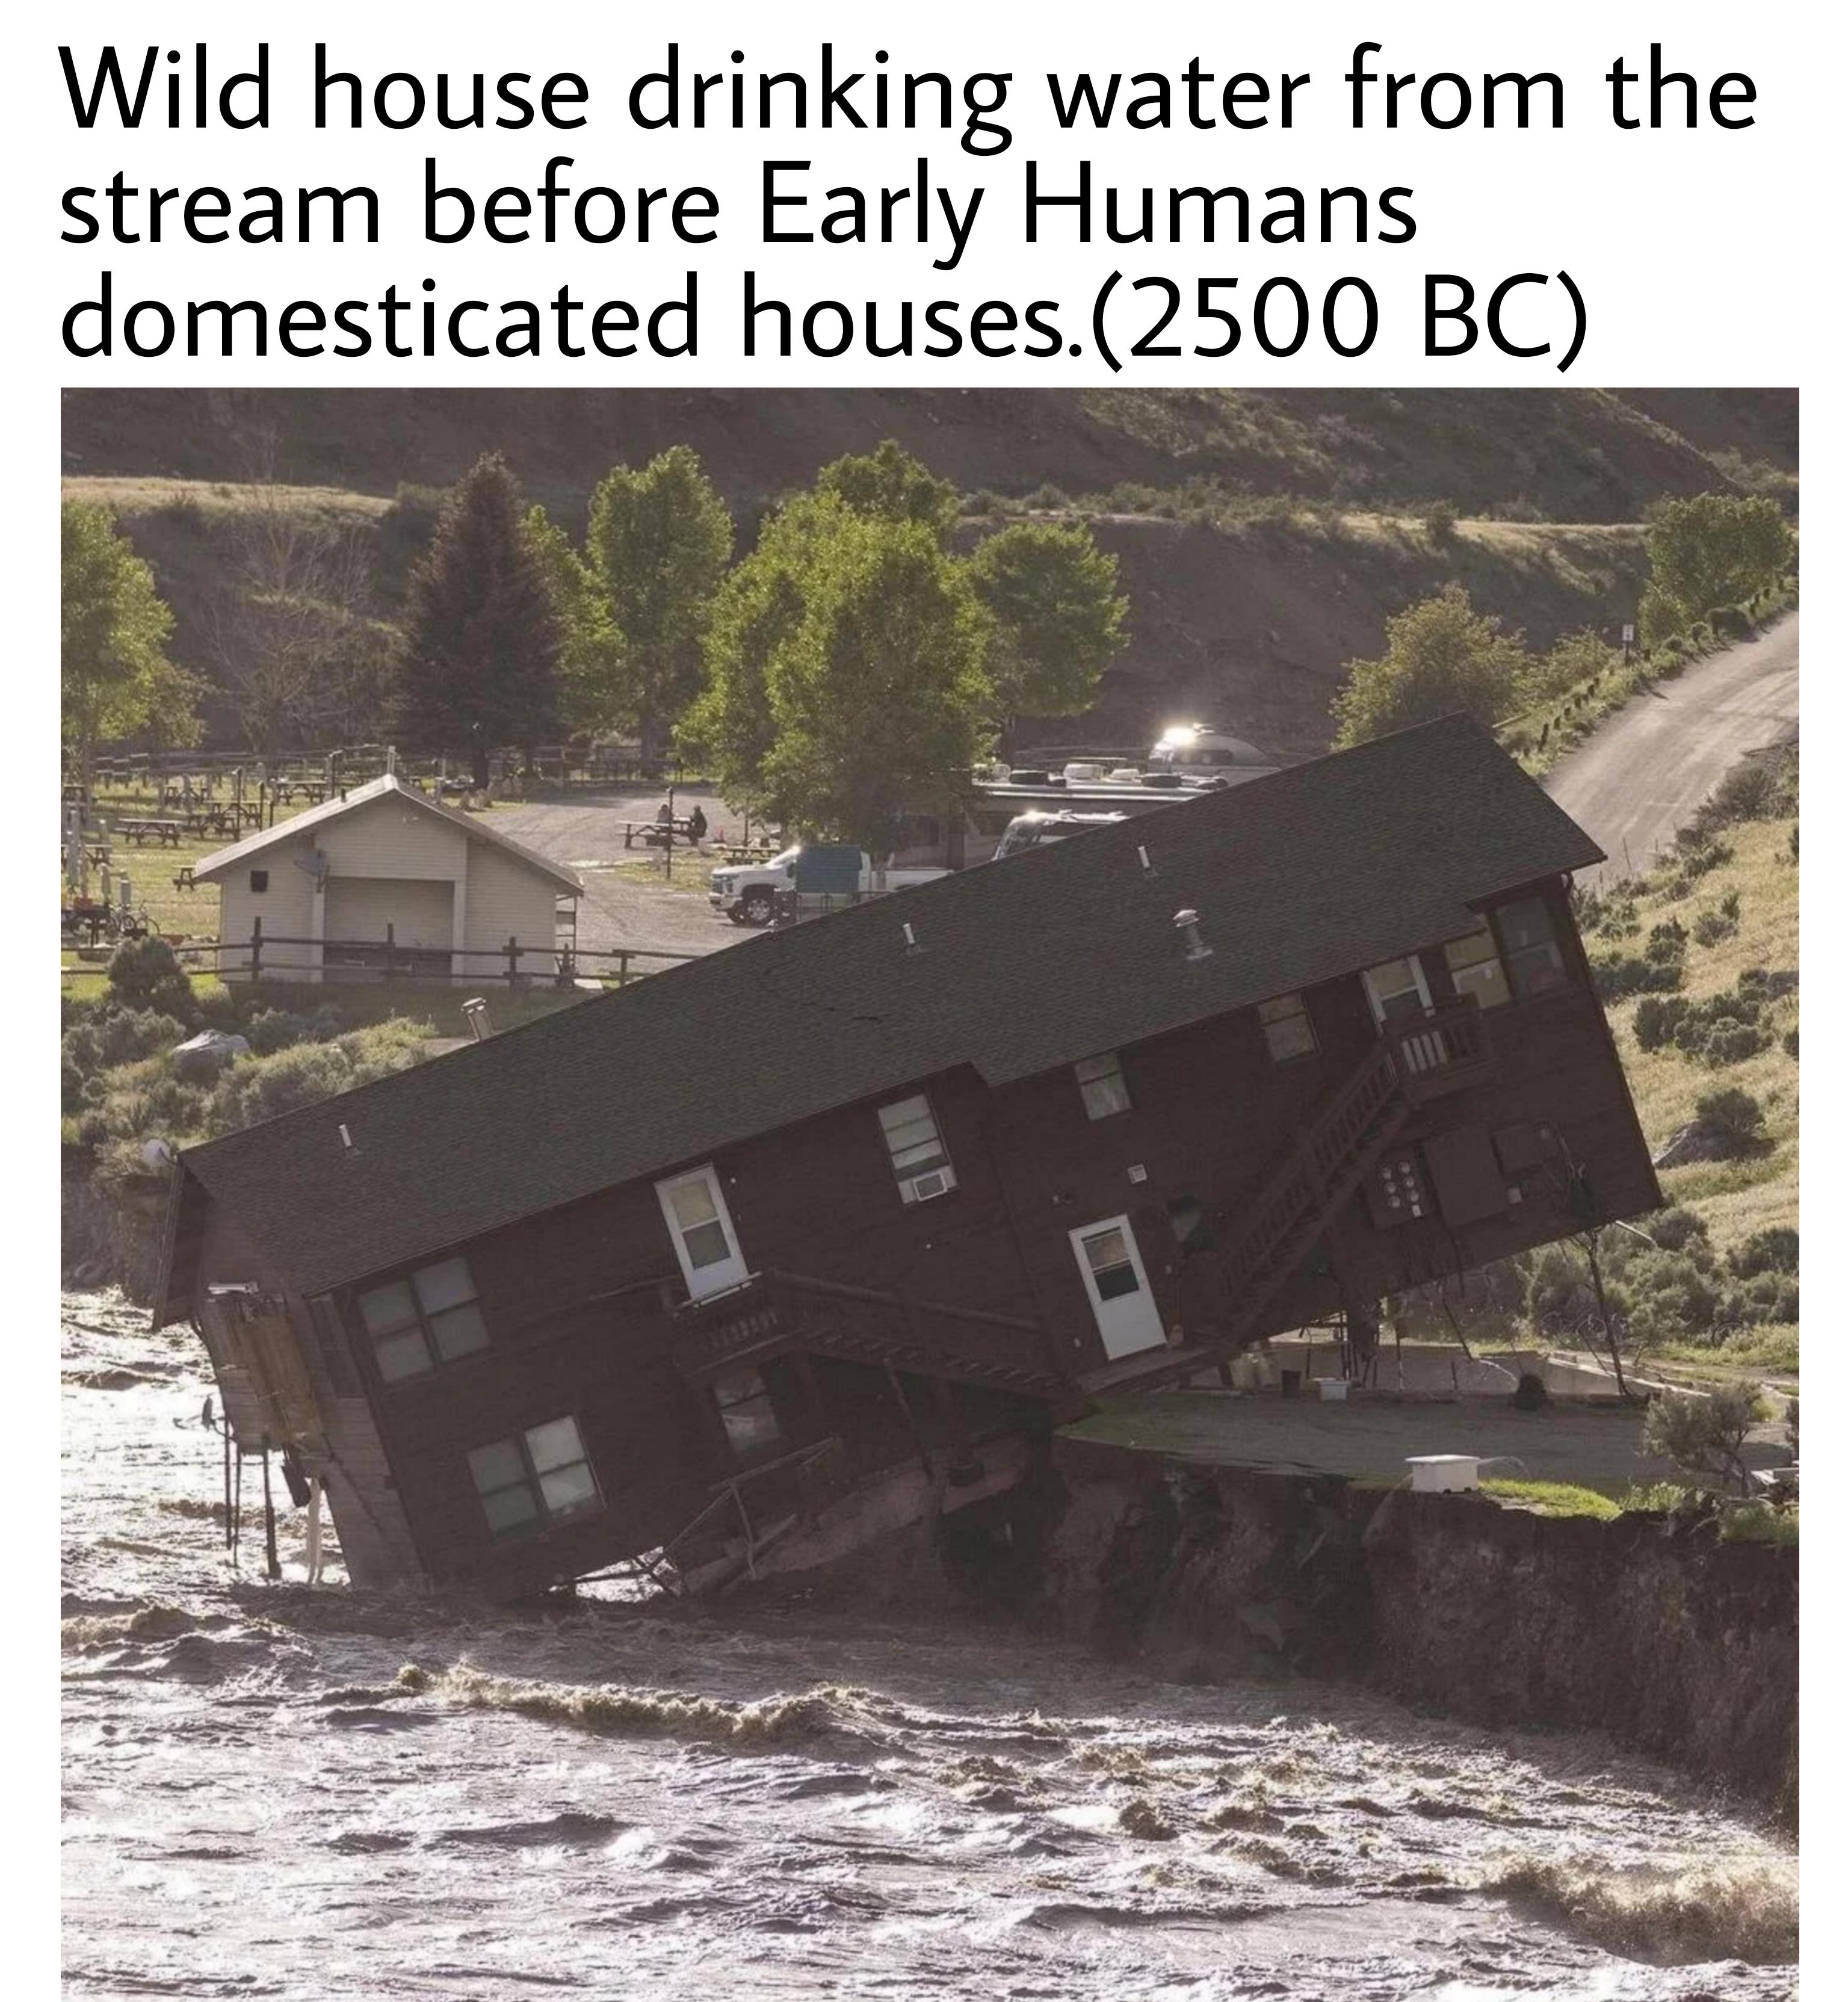 dank memes - vehicle - Wild house drinking water from the stream before Early Humans domesticated houses. 2500 Bc 1801